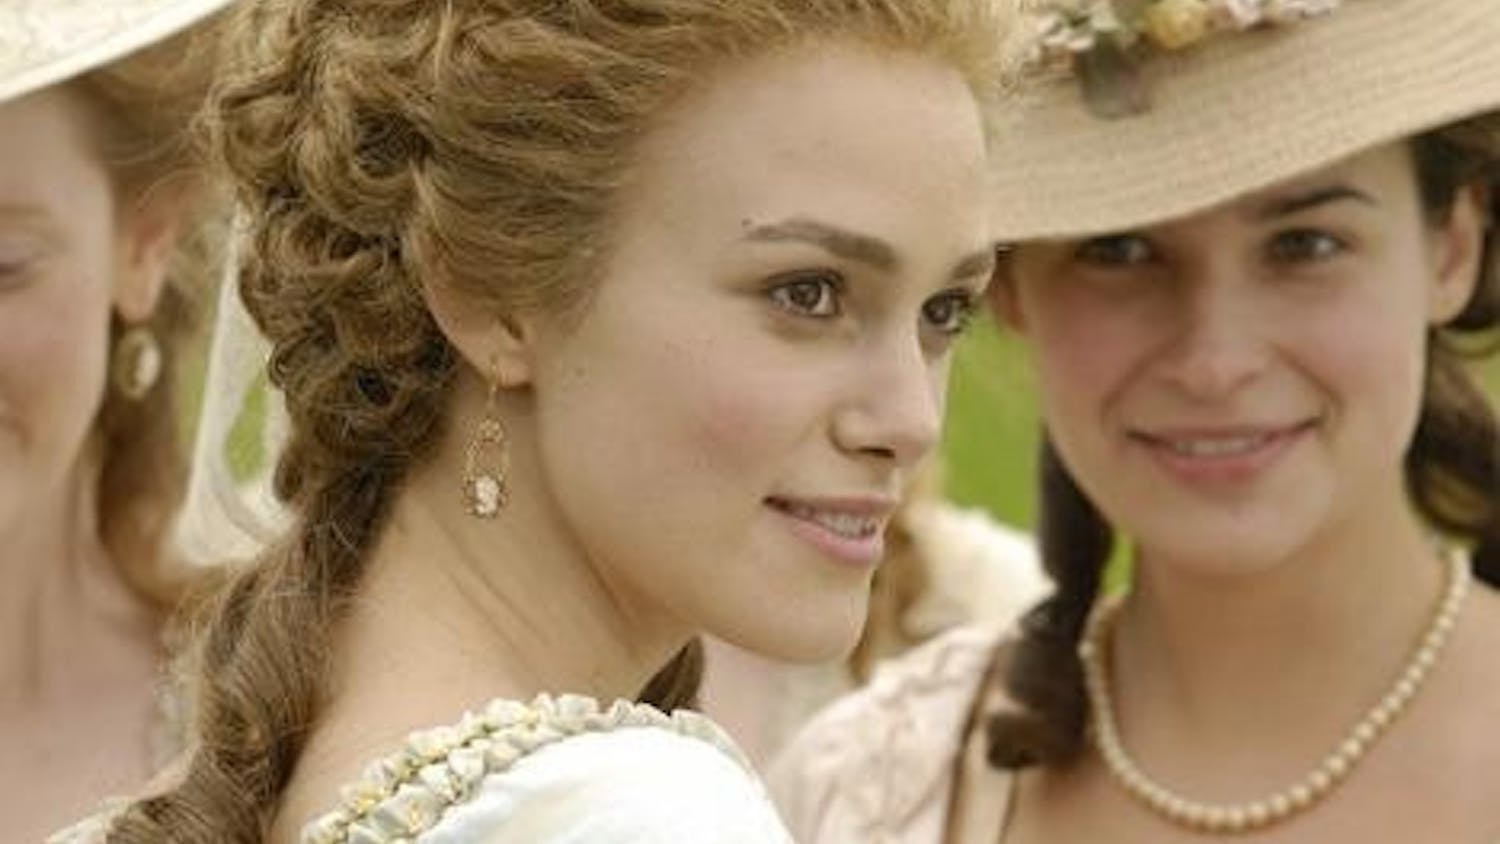 No matter the century, Keira Knightley is a babe.